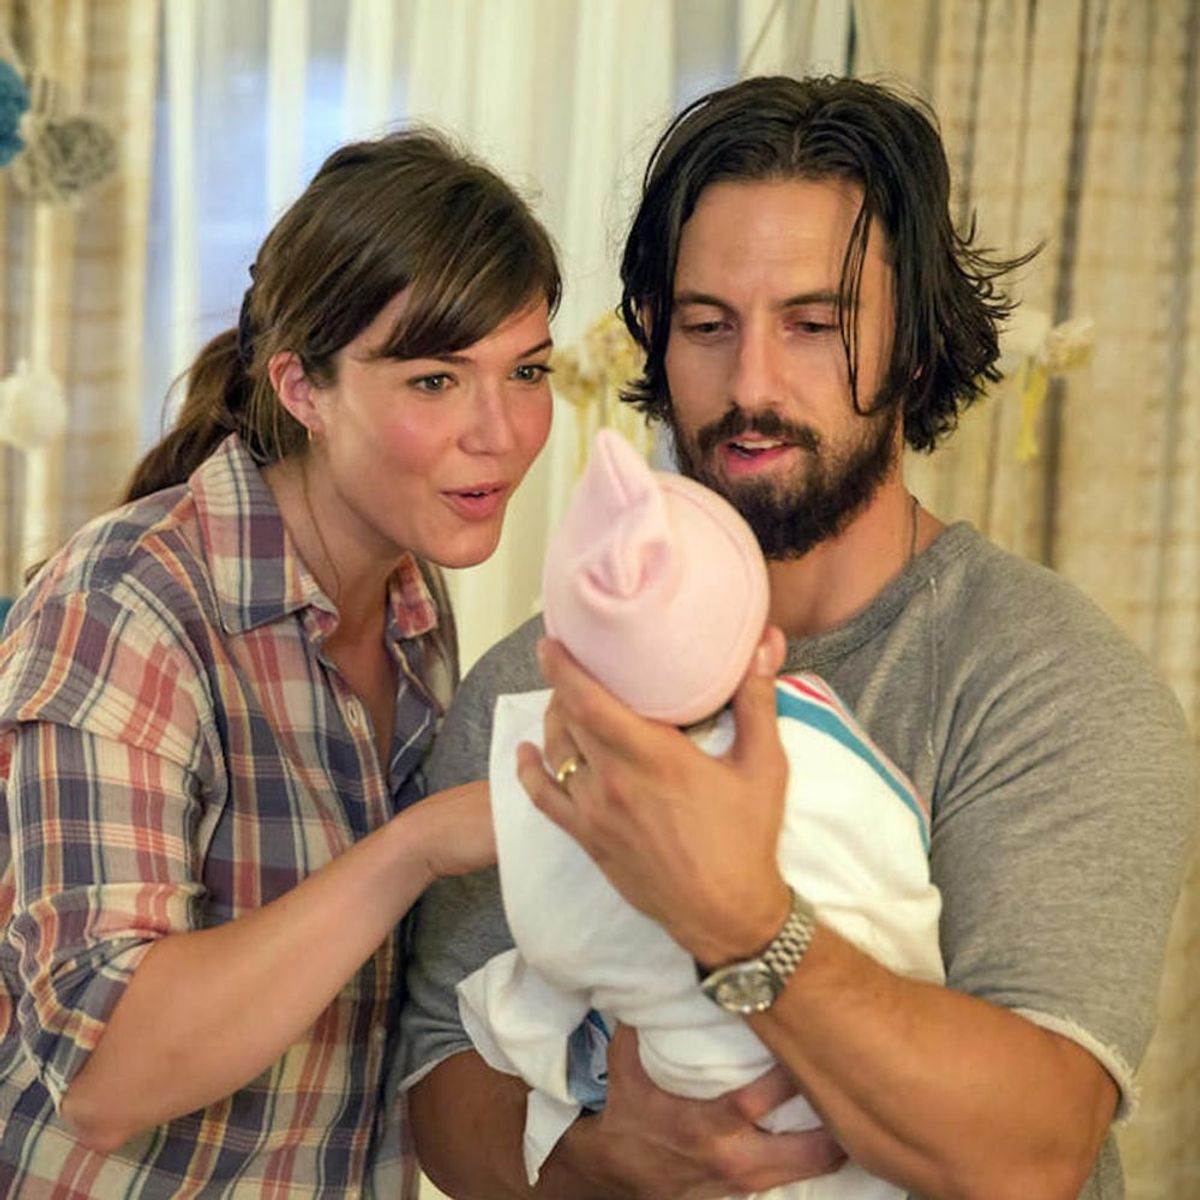 4 Shows That’ll Make You Laugh/Cry Like This Is Us